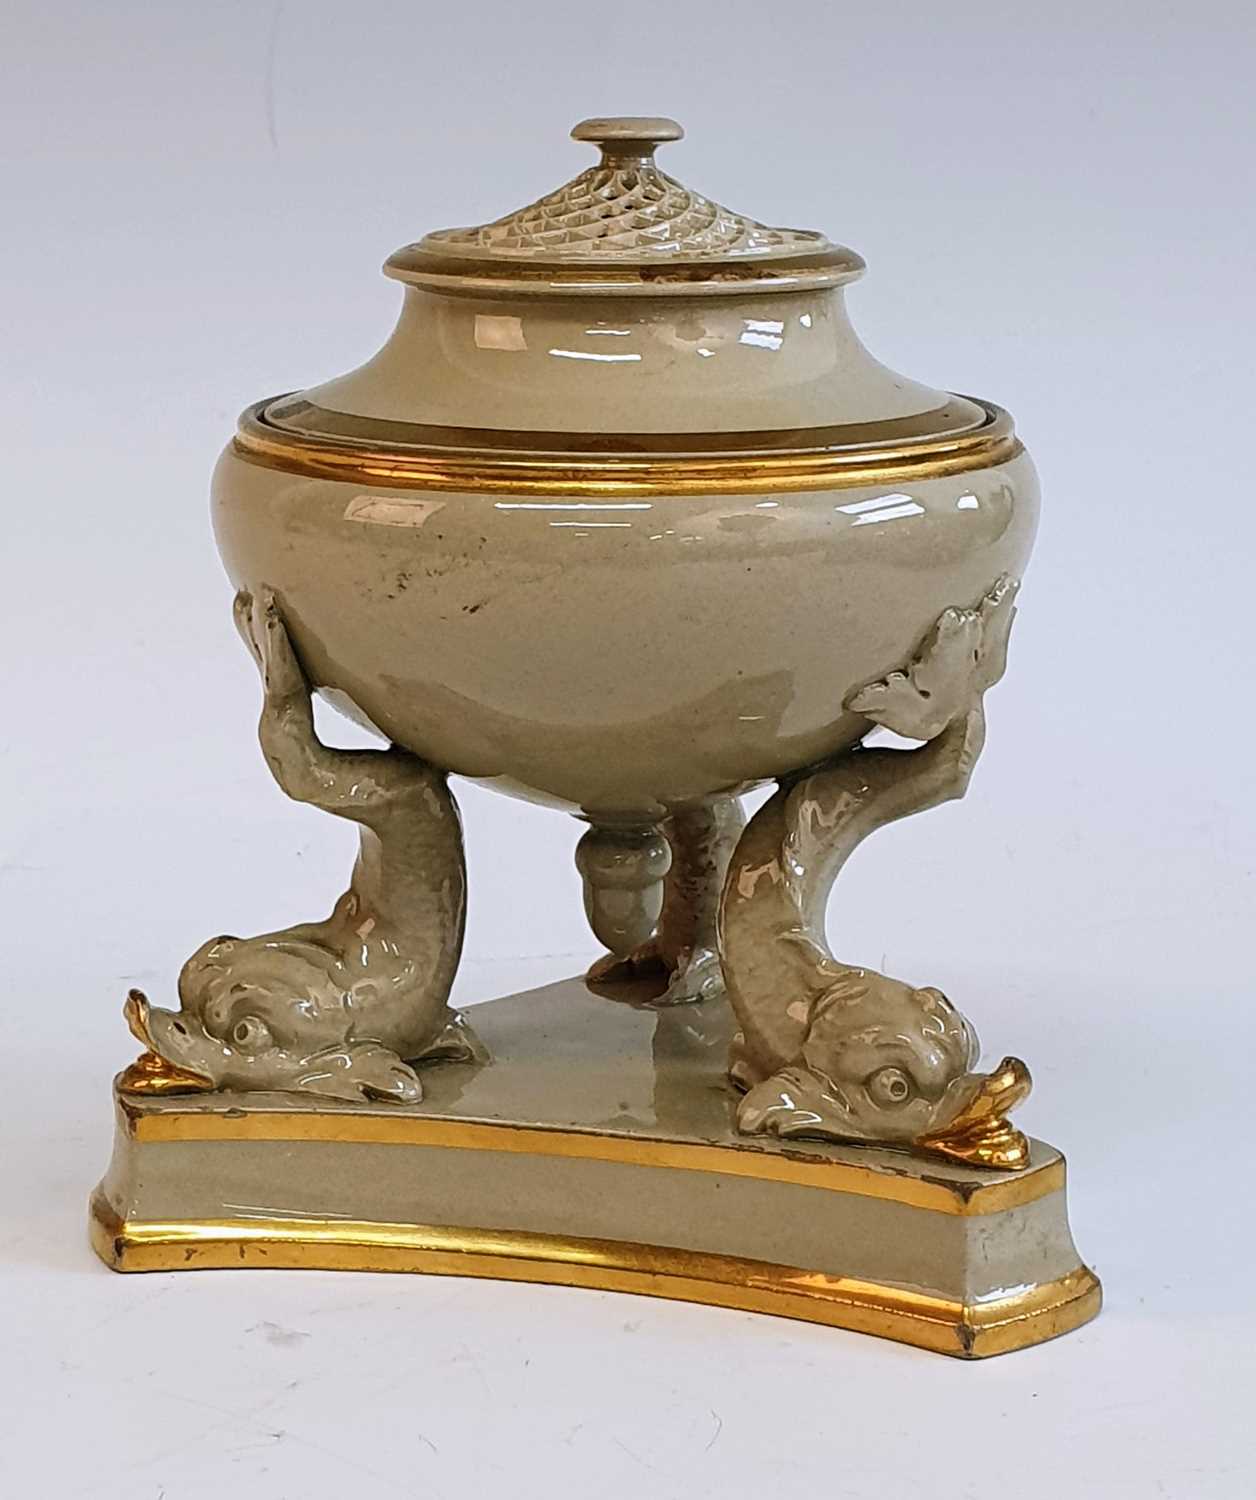 A circa 1820 Wedgwood drabware pastille burner urn, having gilt border, pierced cover and wick